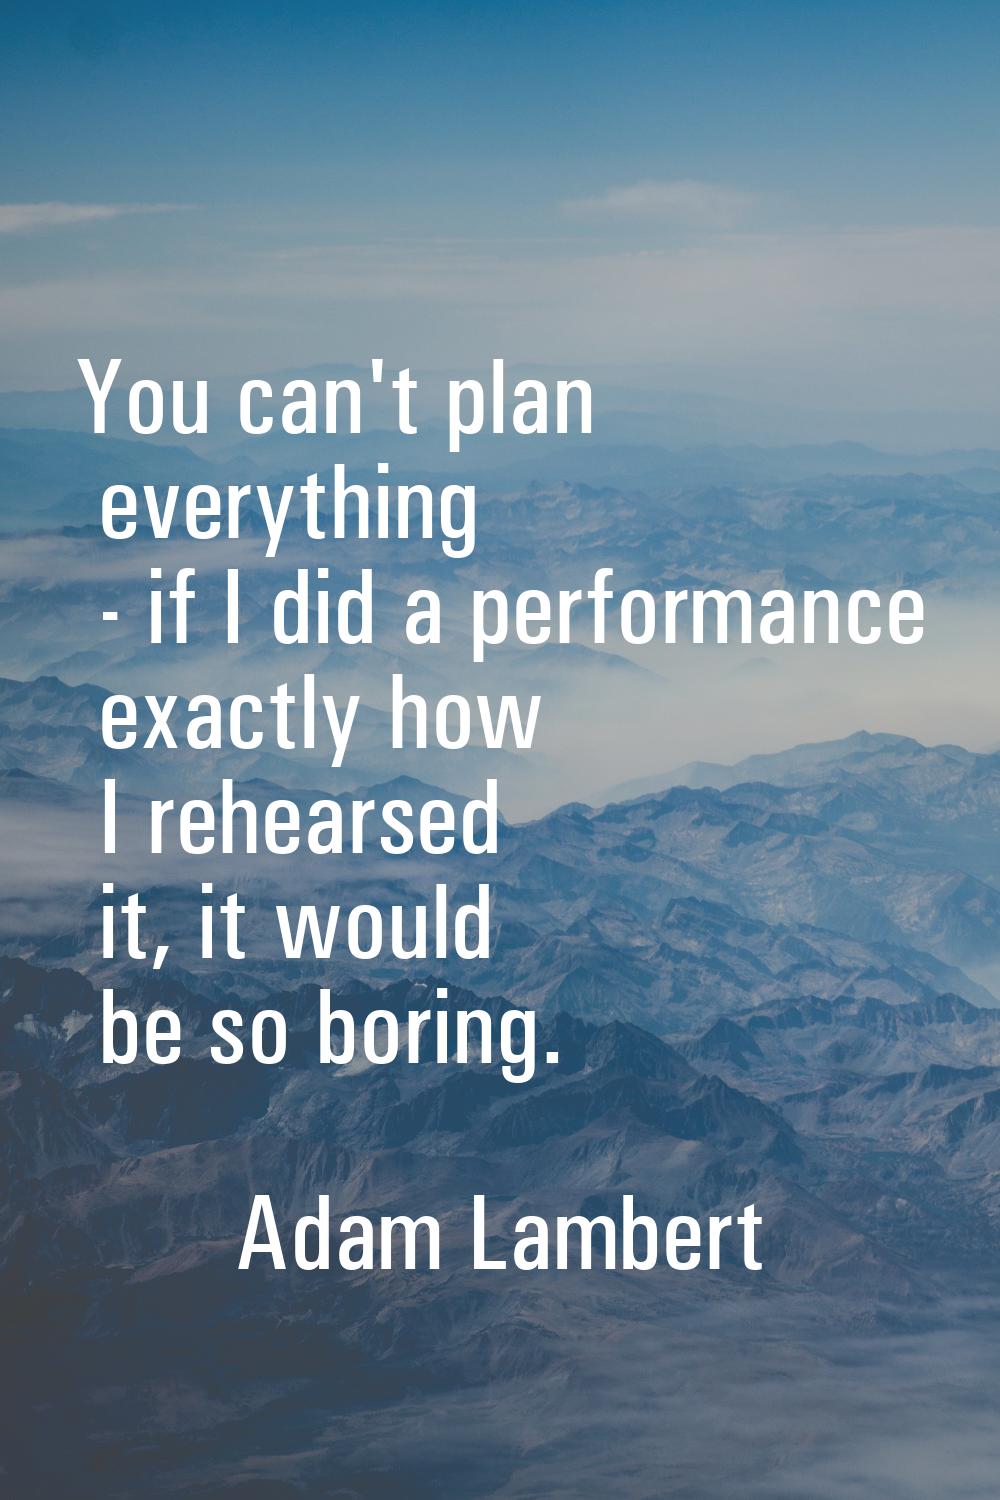 You can't plan everything - if I did a performance exactly how I rehearsed it, it would be so borin